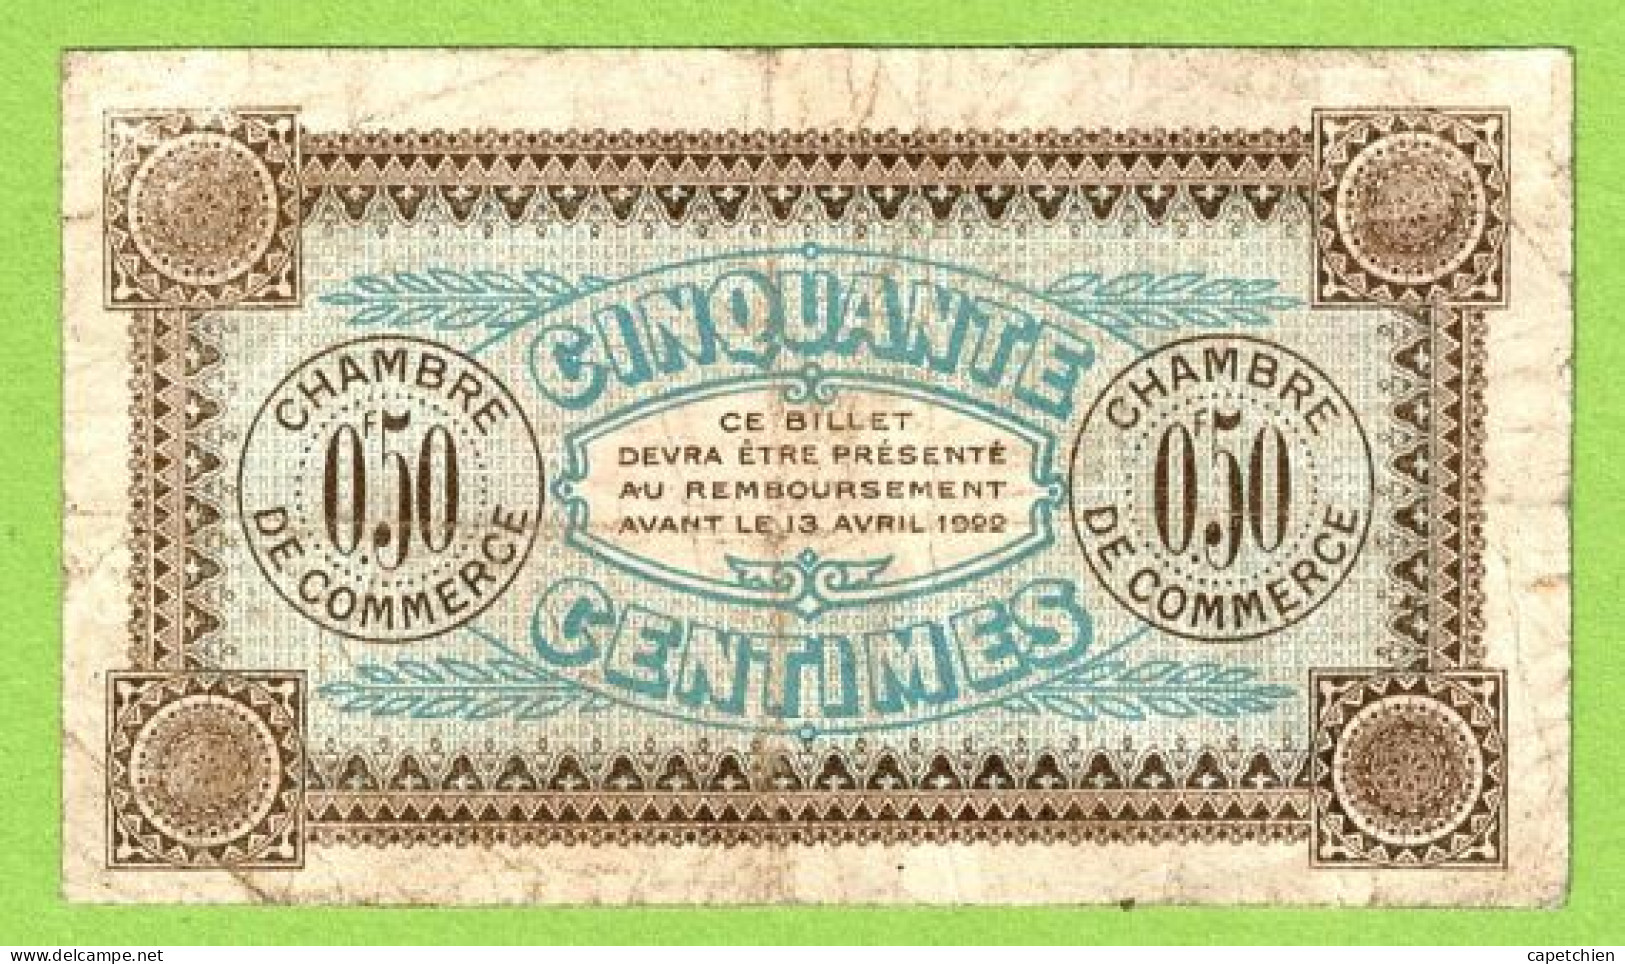 FRANCE / AUXERRE / 50 CENTIMES / 12 AVRIL 1917/ N° 14475 / SERIE  AB 127 - Chamber Of Commerce